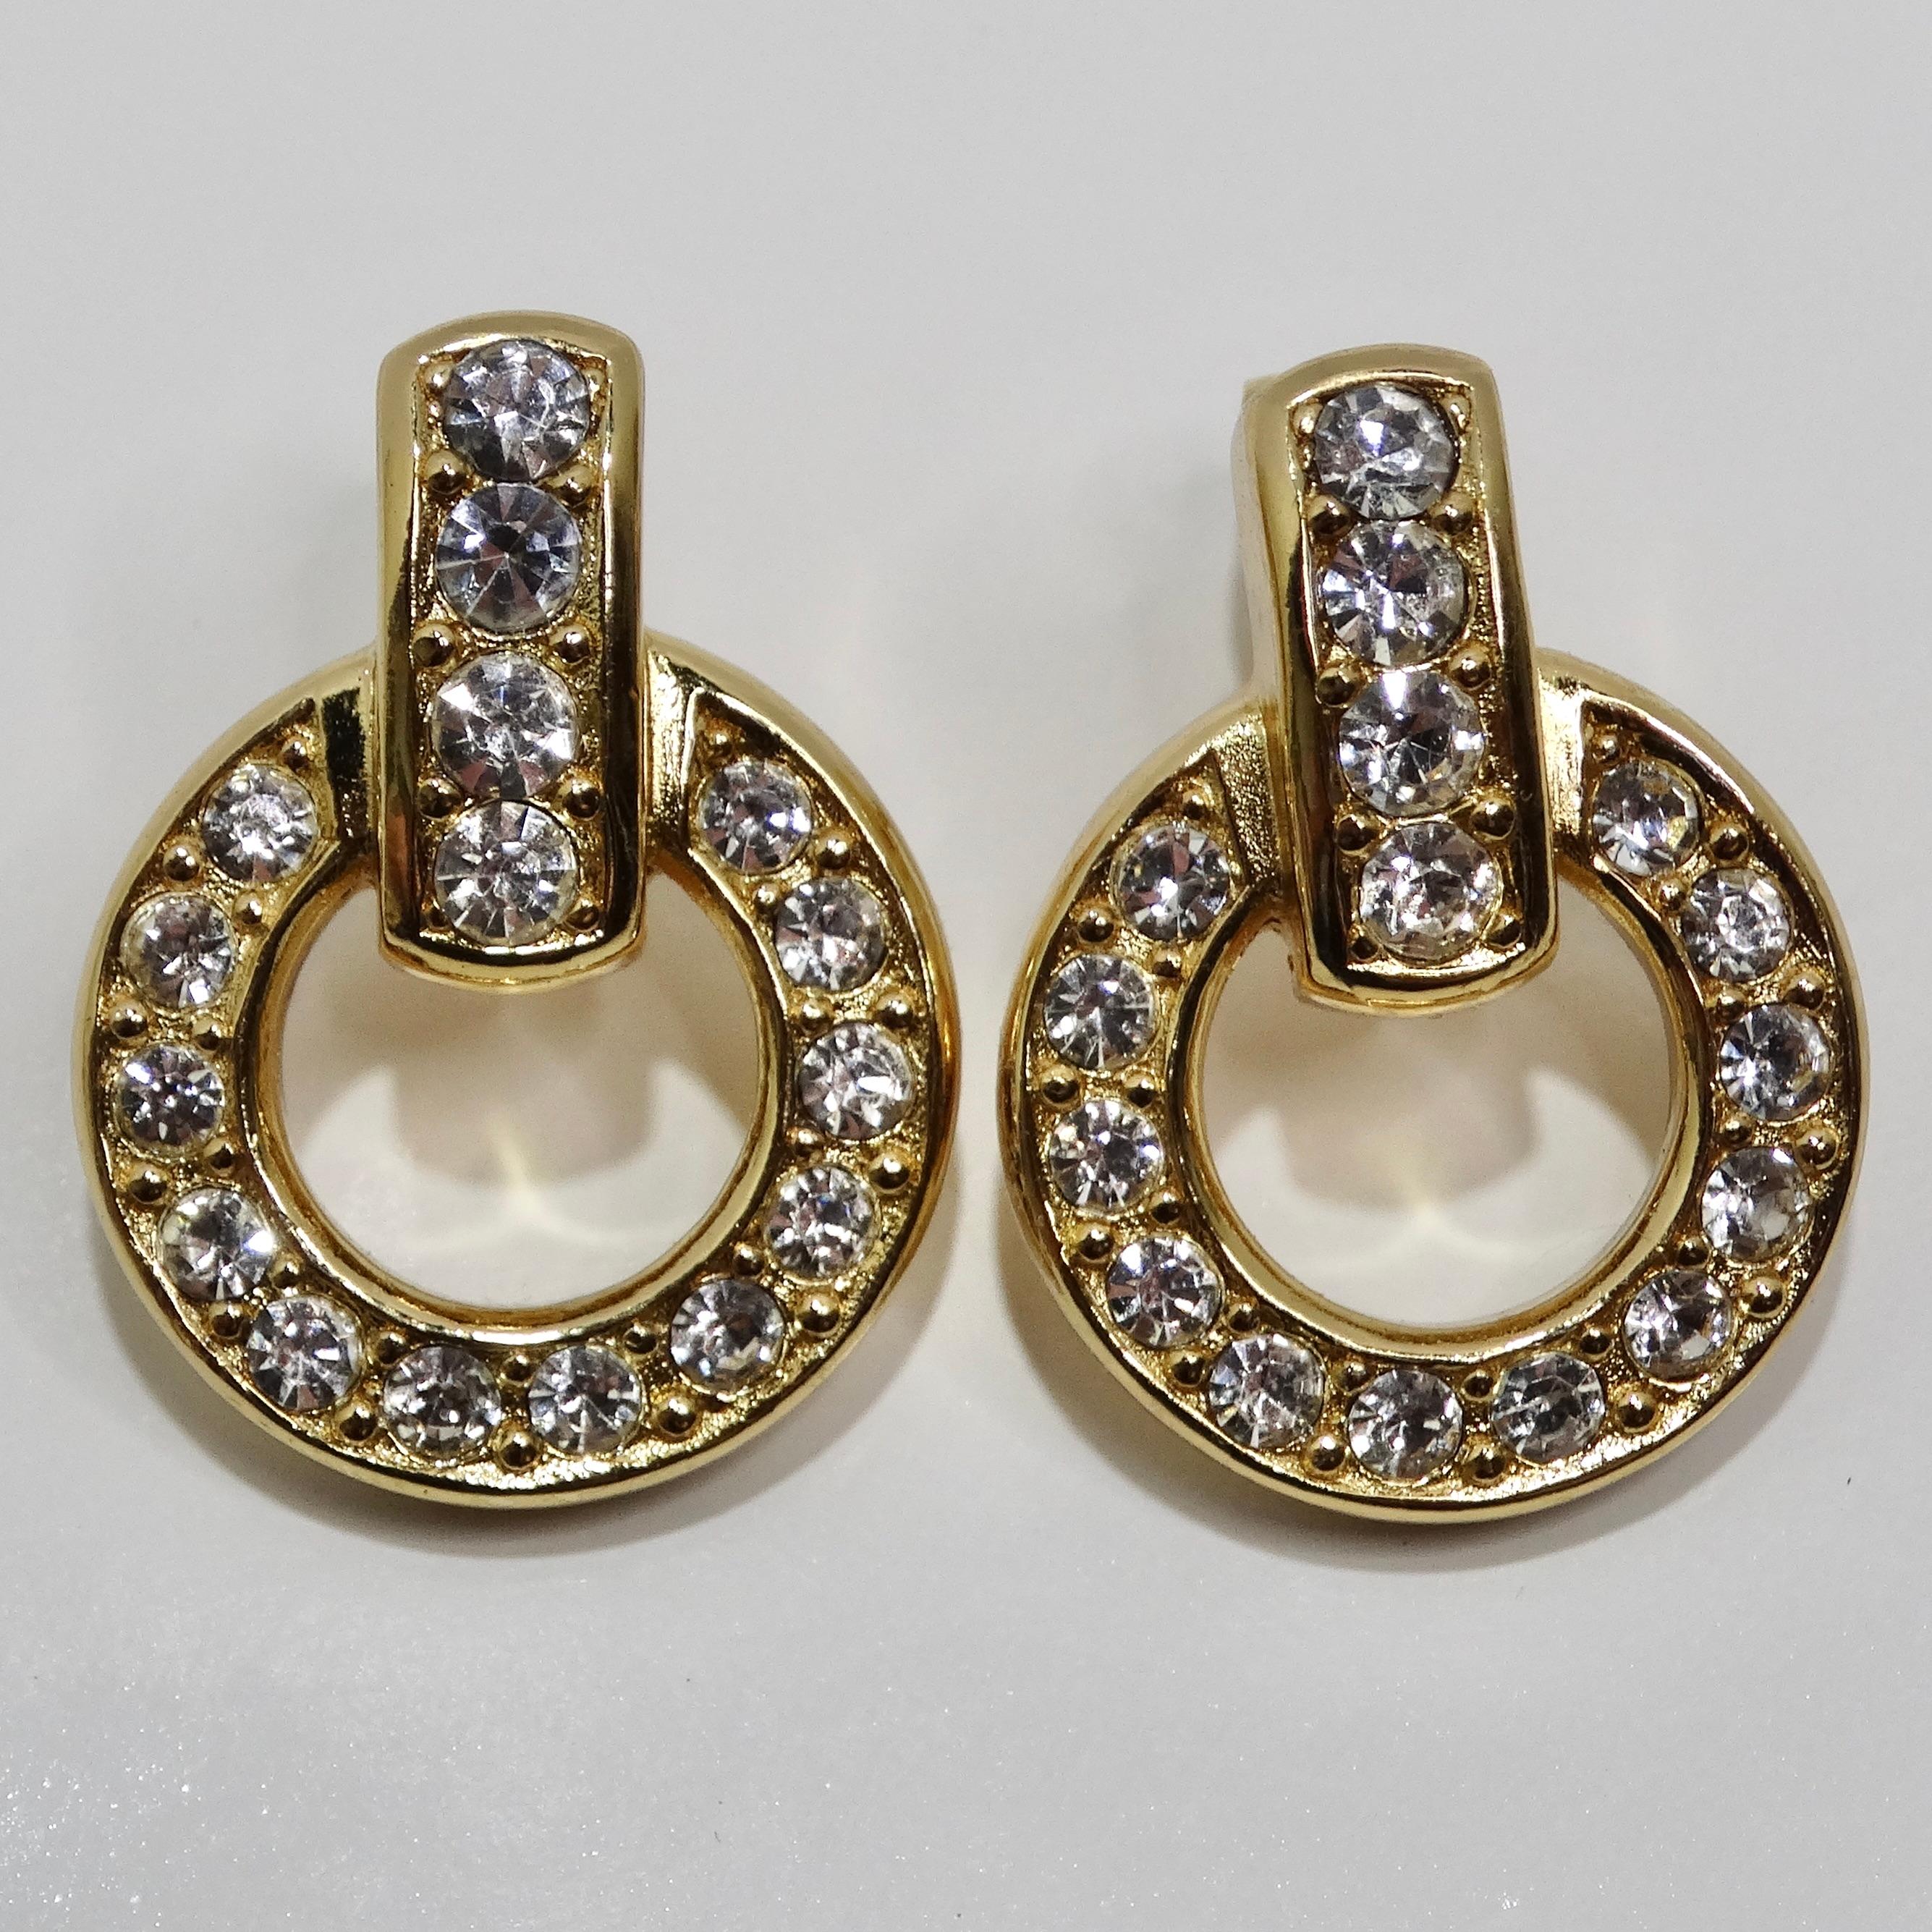 Introducing the Christian Dior Vintage 18K Gold Plated Rhinestone Earrings, a stunning pair of dangle earrings that exude glamour and timeless elegance. These vintage earrings feature a circle motif, elegantly adorned with sparkling rhinestones, all